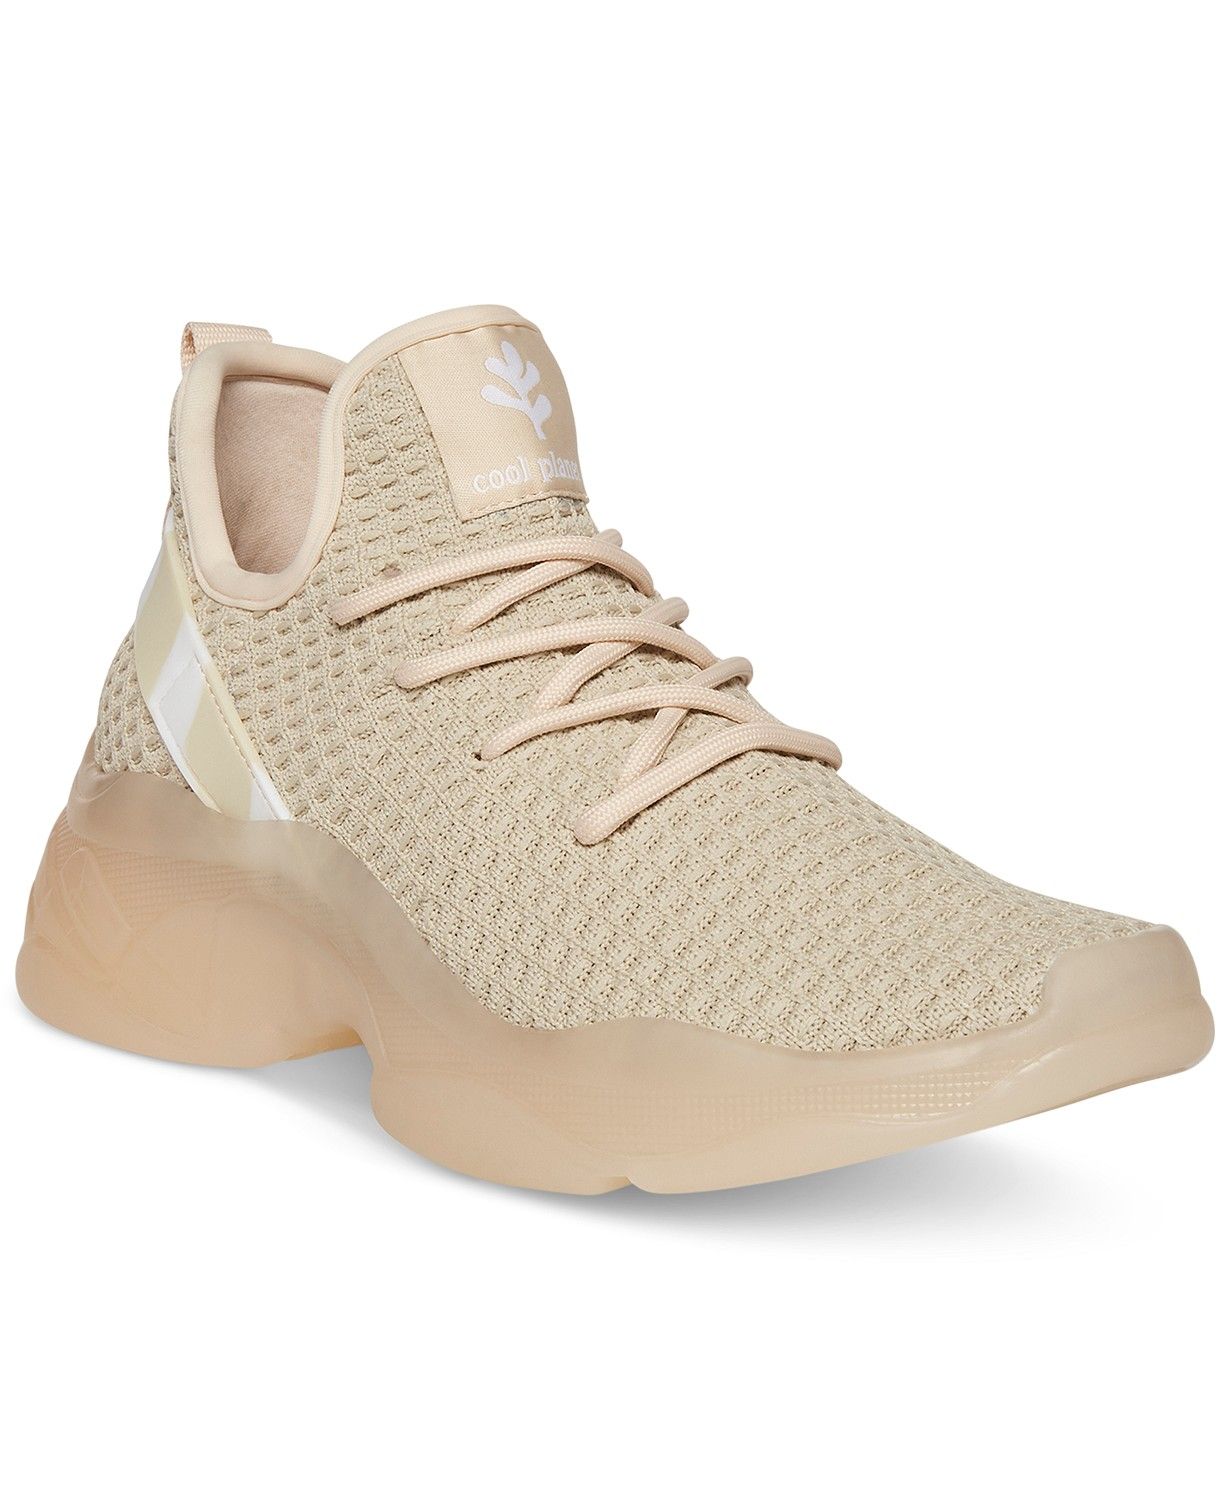 cool planet by Steve Madden
          
  
  
      
          Women's Canyon Knit Lace-Up Sneaker... | Macys (US)